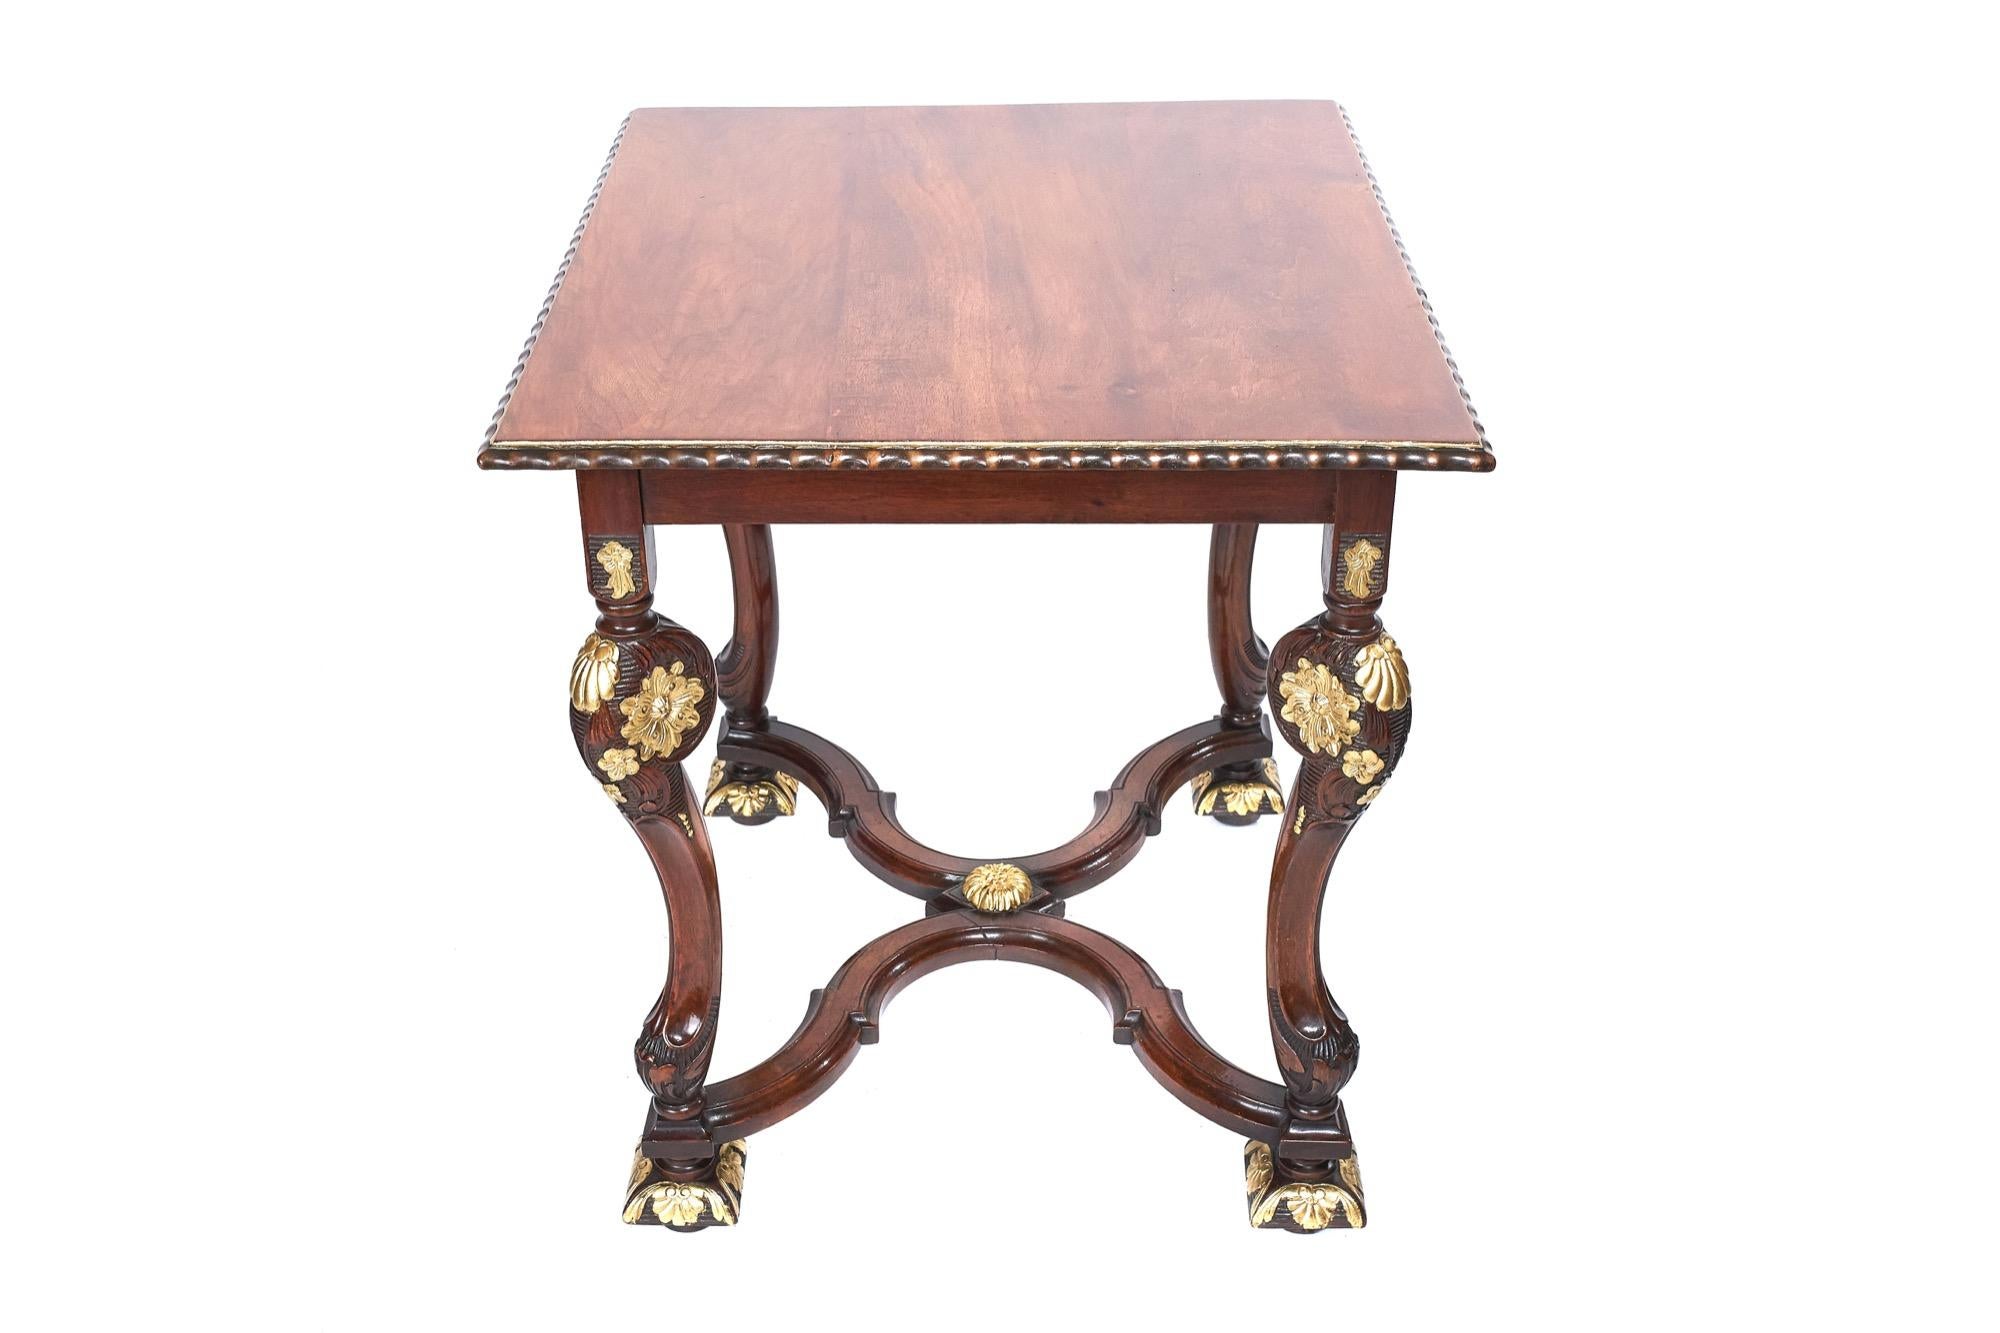 William & Mary Revival walnut centre table with parcel gilt decoration
circa 1920
Walnut top with gadroon carved edge,
4 Shaped & carved legs with parcel gilt decoration,
shaped walnut X stretcher 
sitting on 4 square feet with parcel gilt